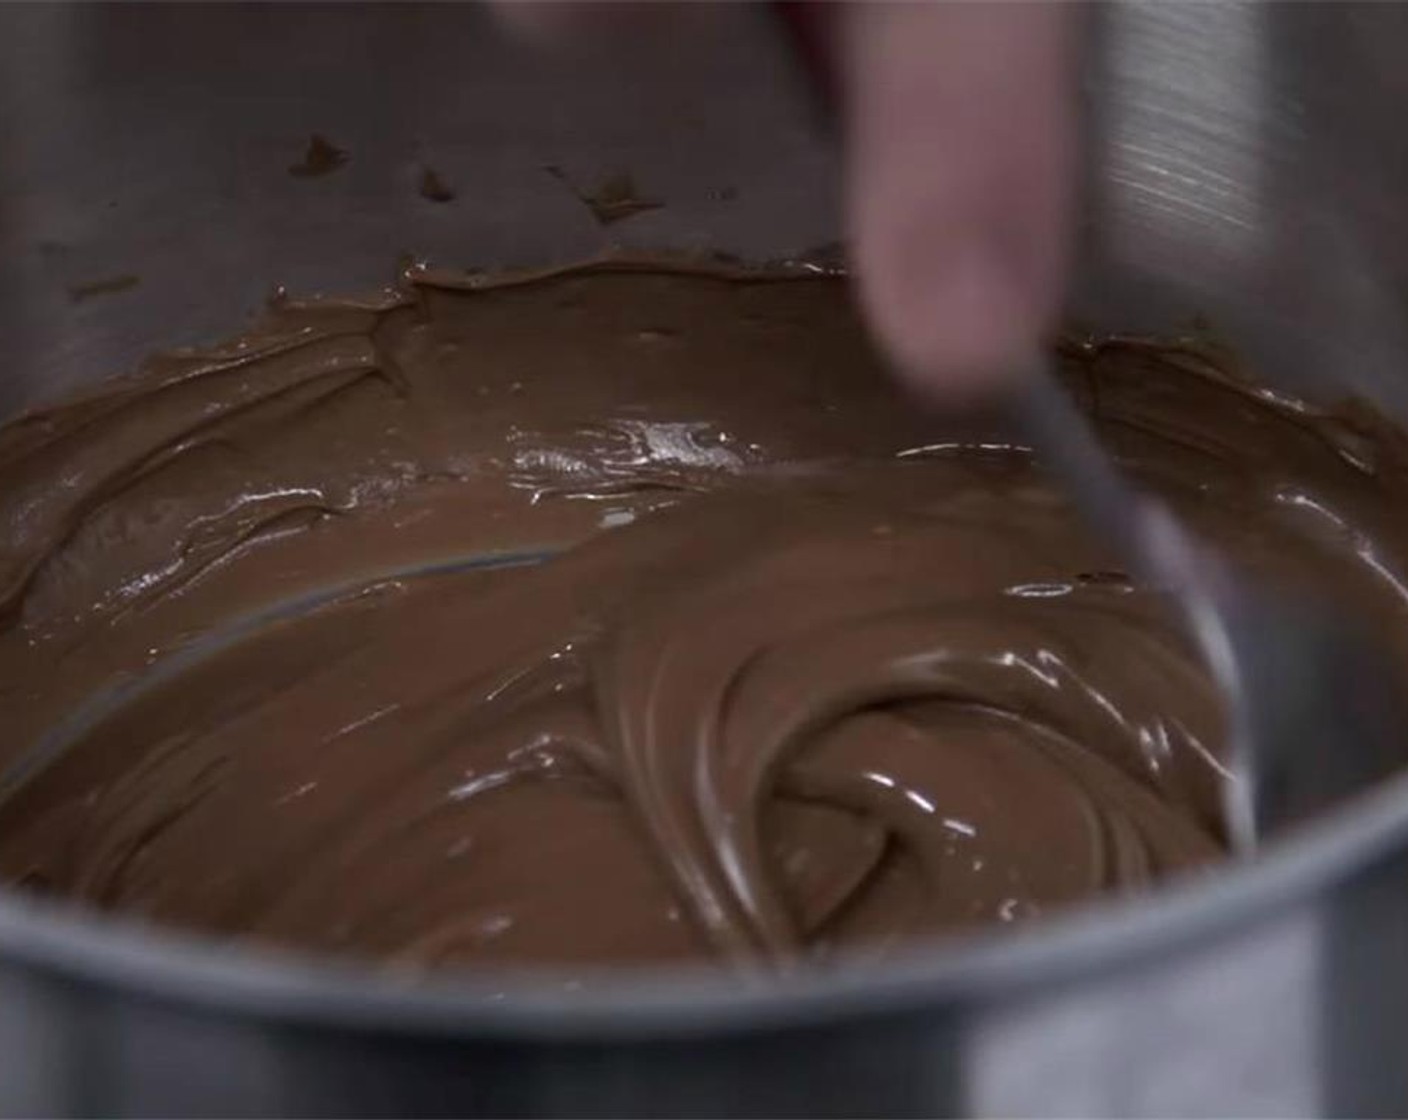 step 4 Keep stirring on low heat to prevent the chocolate from burning. Once melted and smooth, set aside.